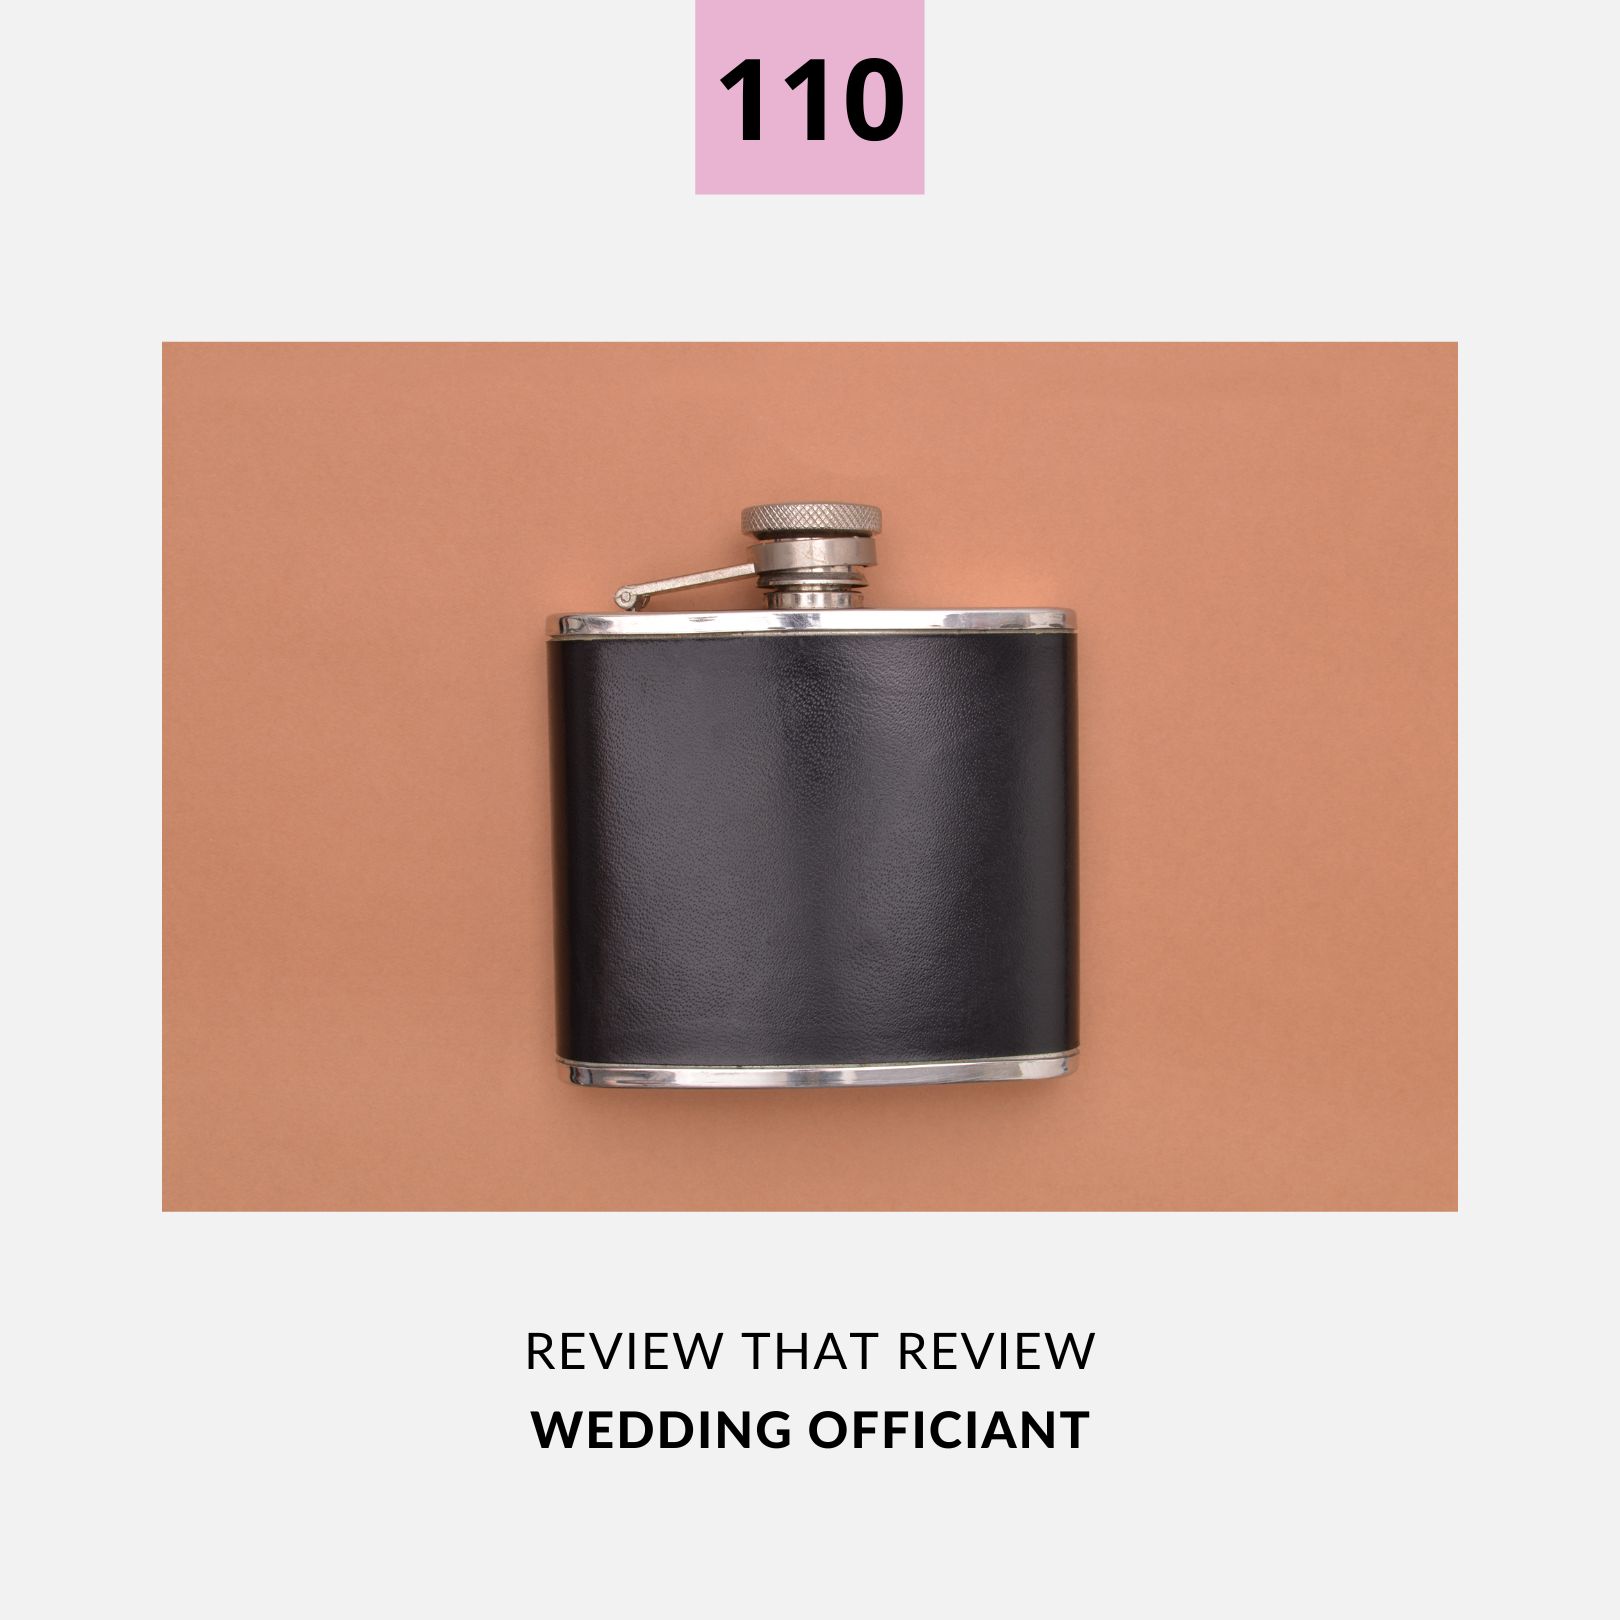 Episode 110: Wedding Officiant - 1 Star Review